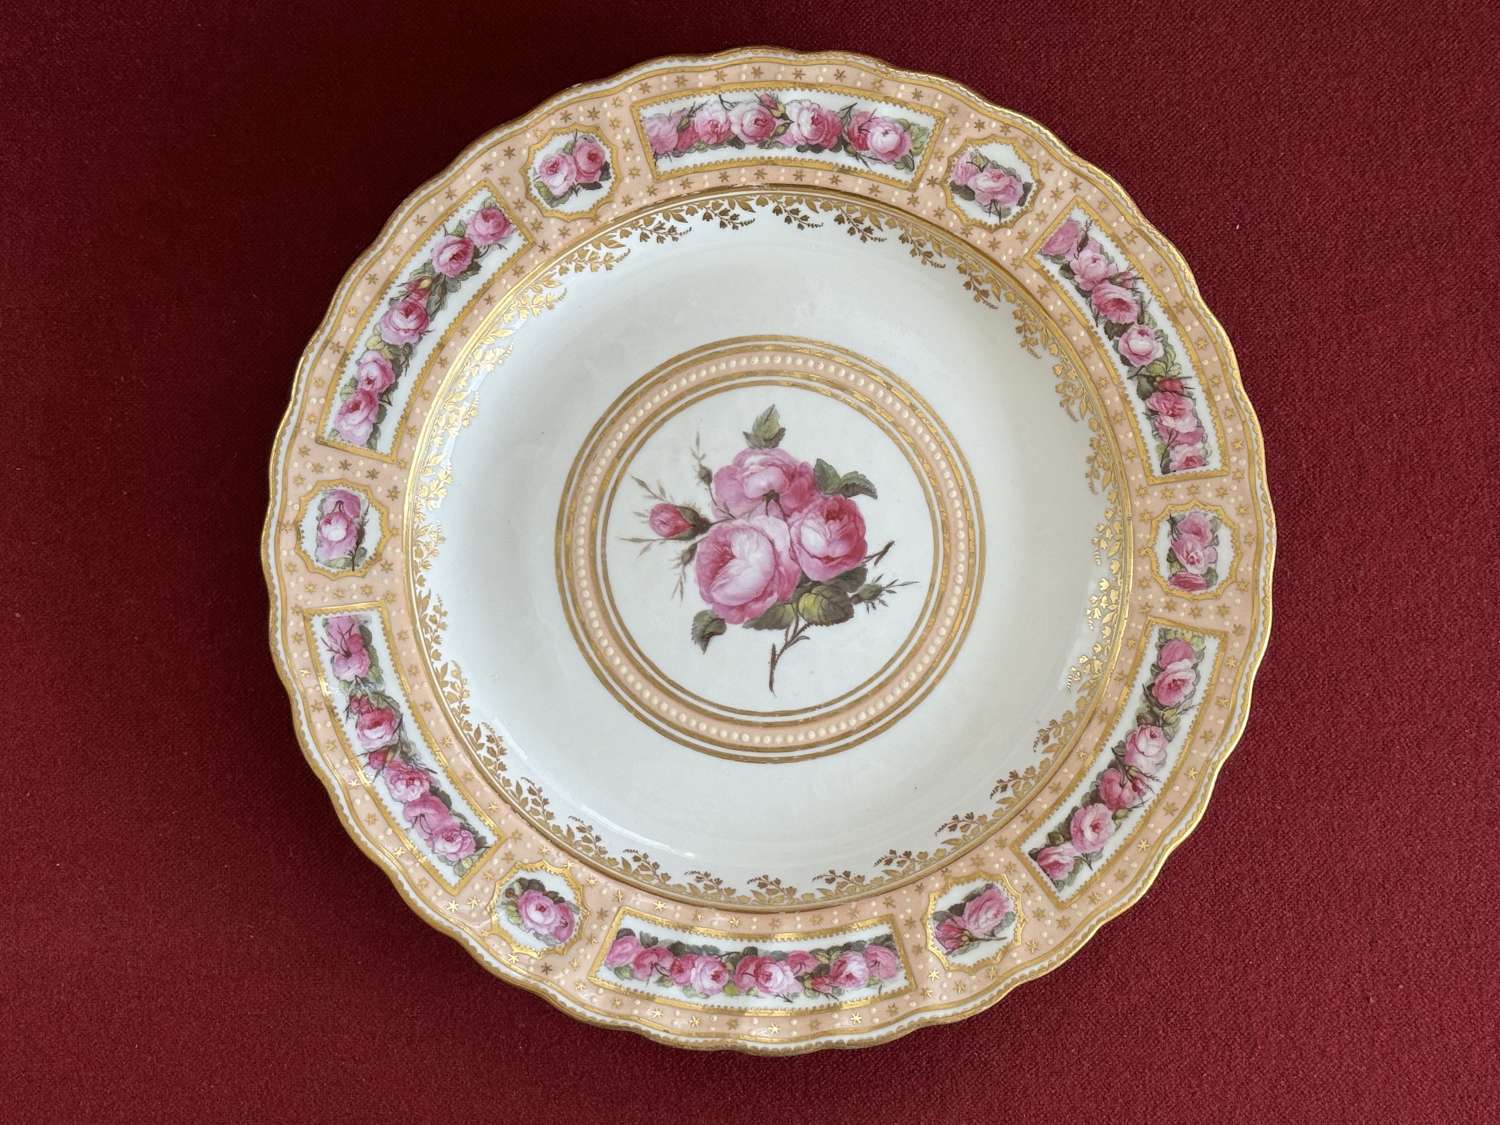 A Derby Porcelain Plate c.1790 decorated by Billingsley in pattern 129